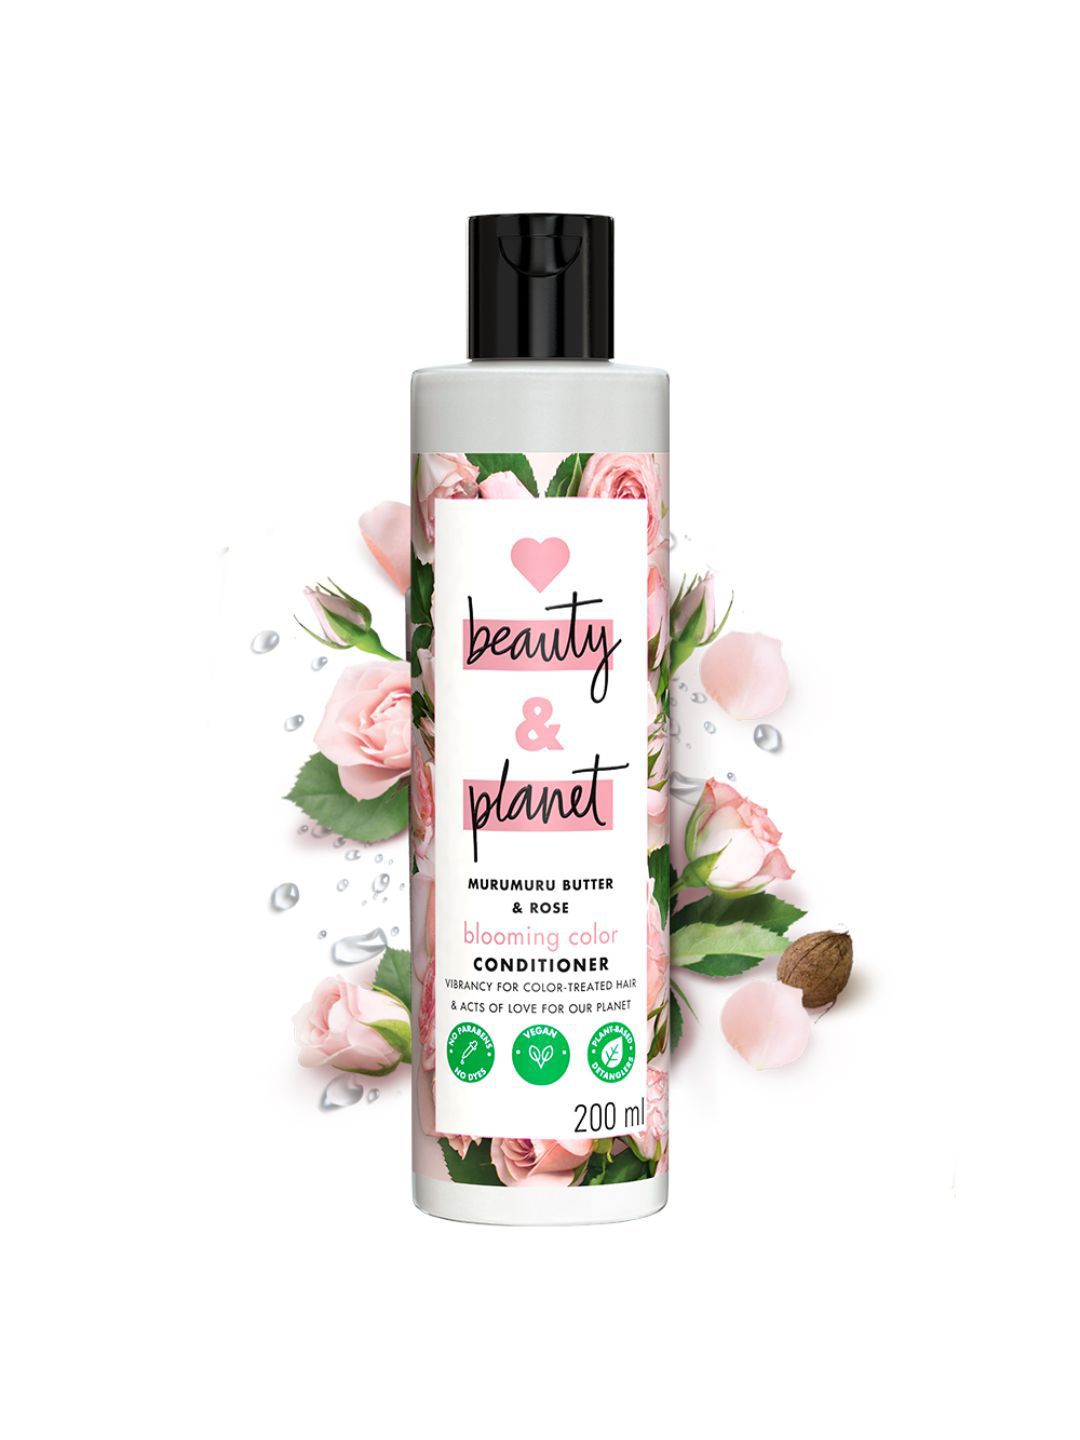 Love Beauty & Planet Murumuru Butter and Rose Blooming Colour Conditioner 200 ml Price in India